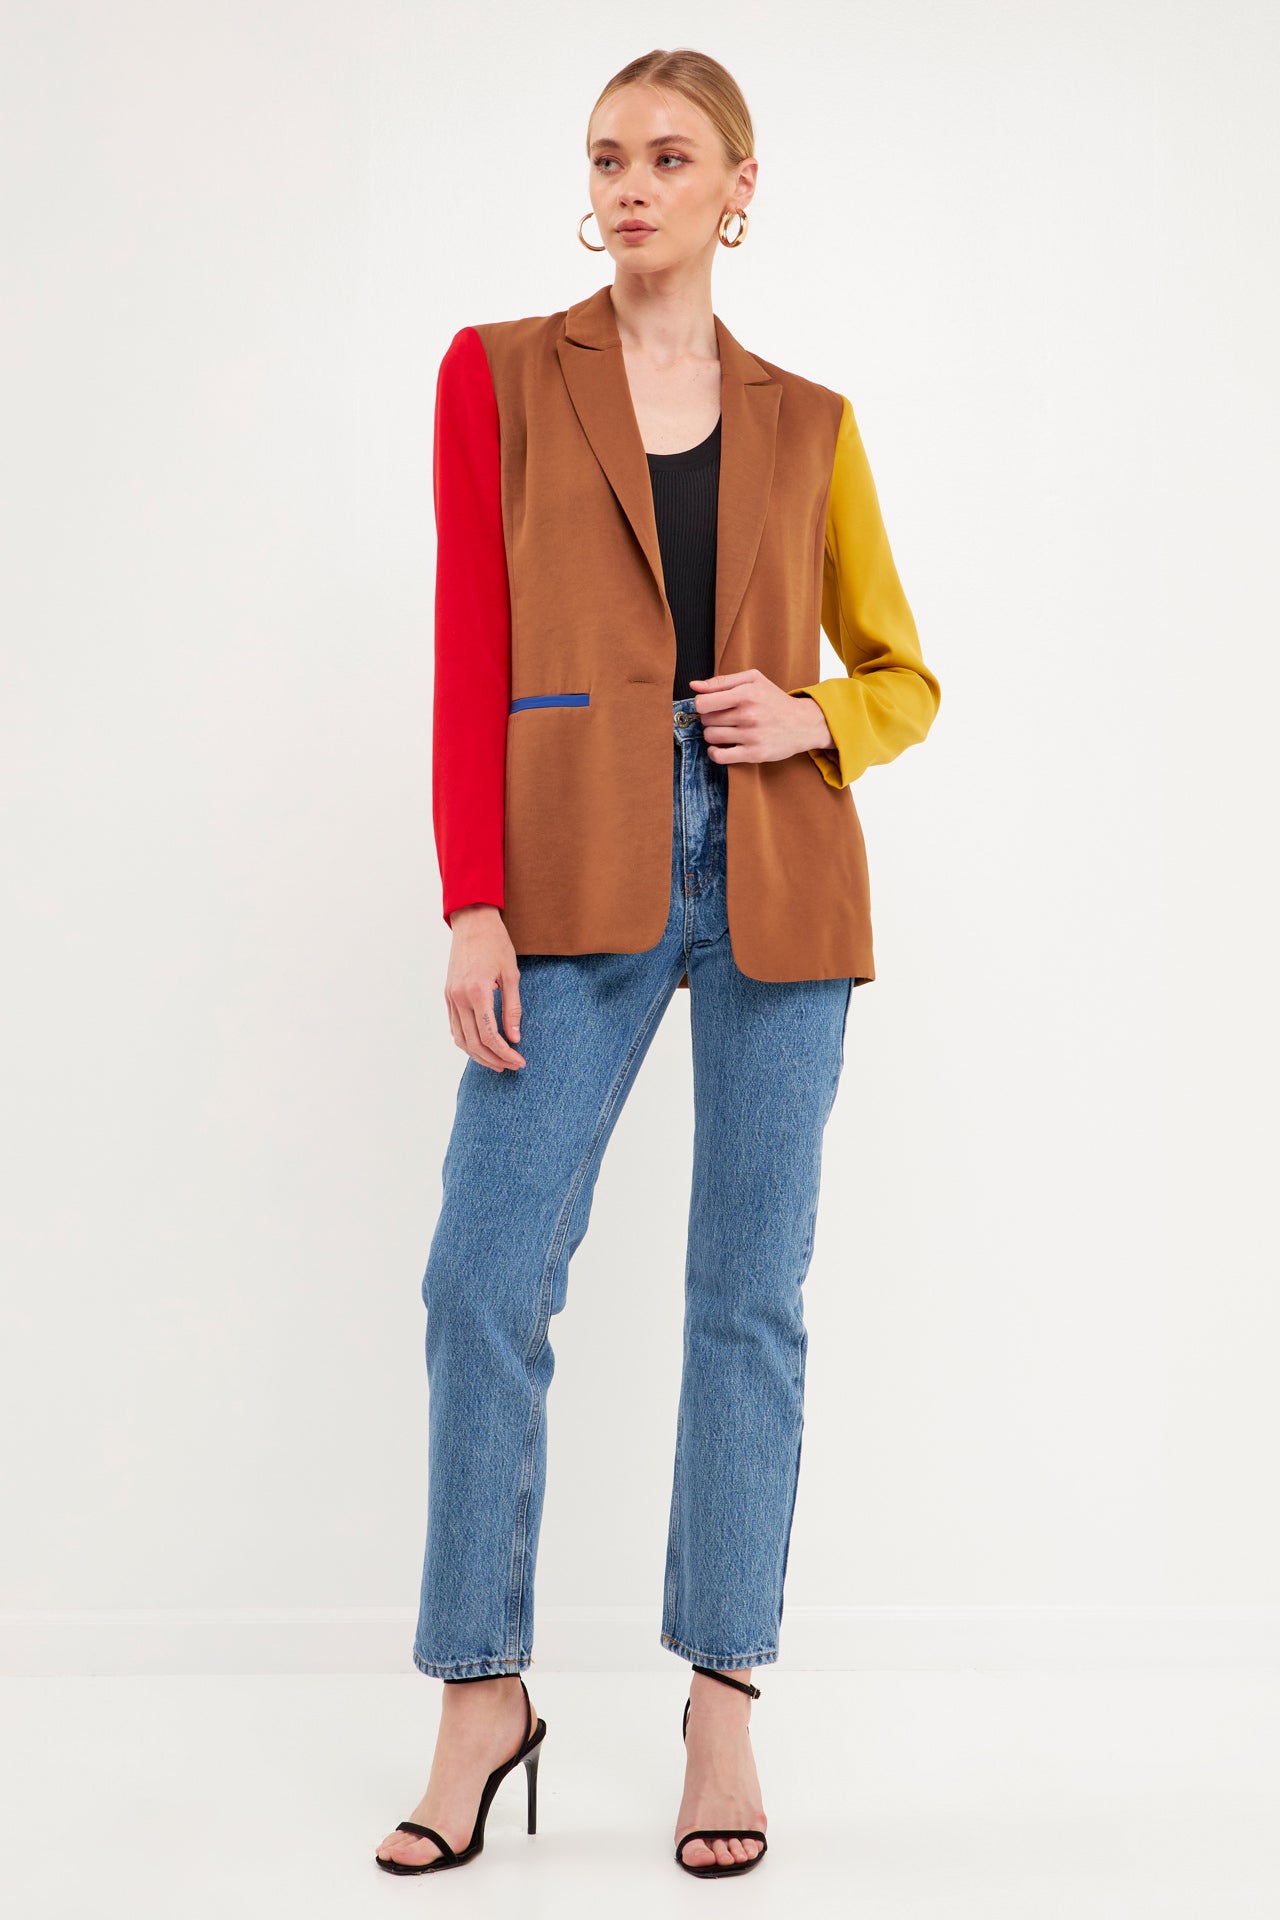 ENDLESS ROSE - Colorblock Blazer - BLAZERS available at Objectrare